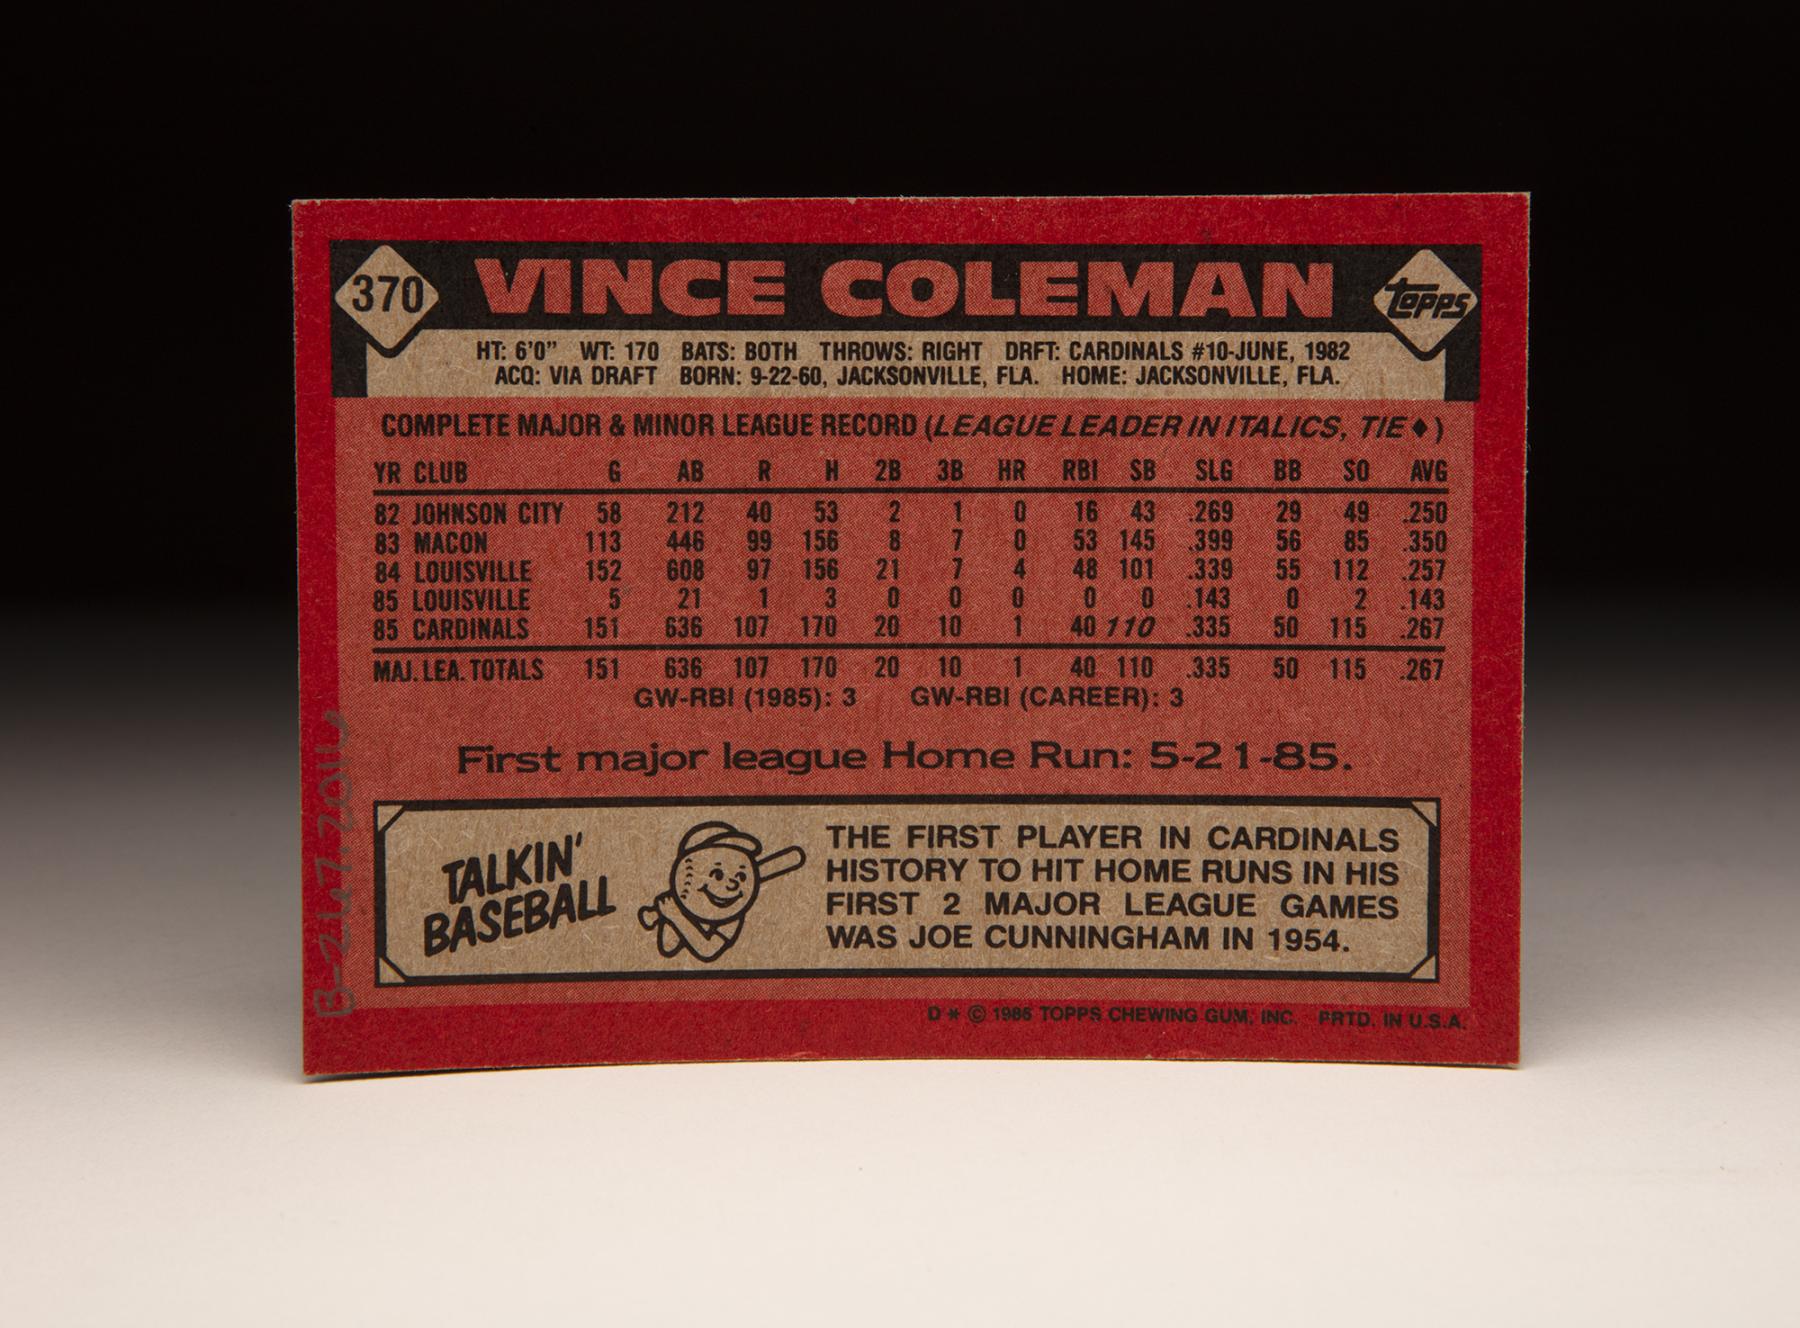 1986 Topps Vince Coleman